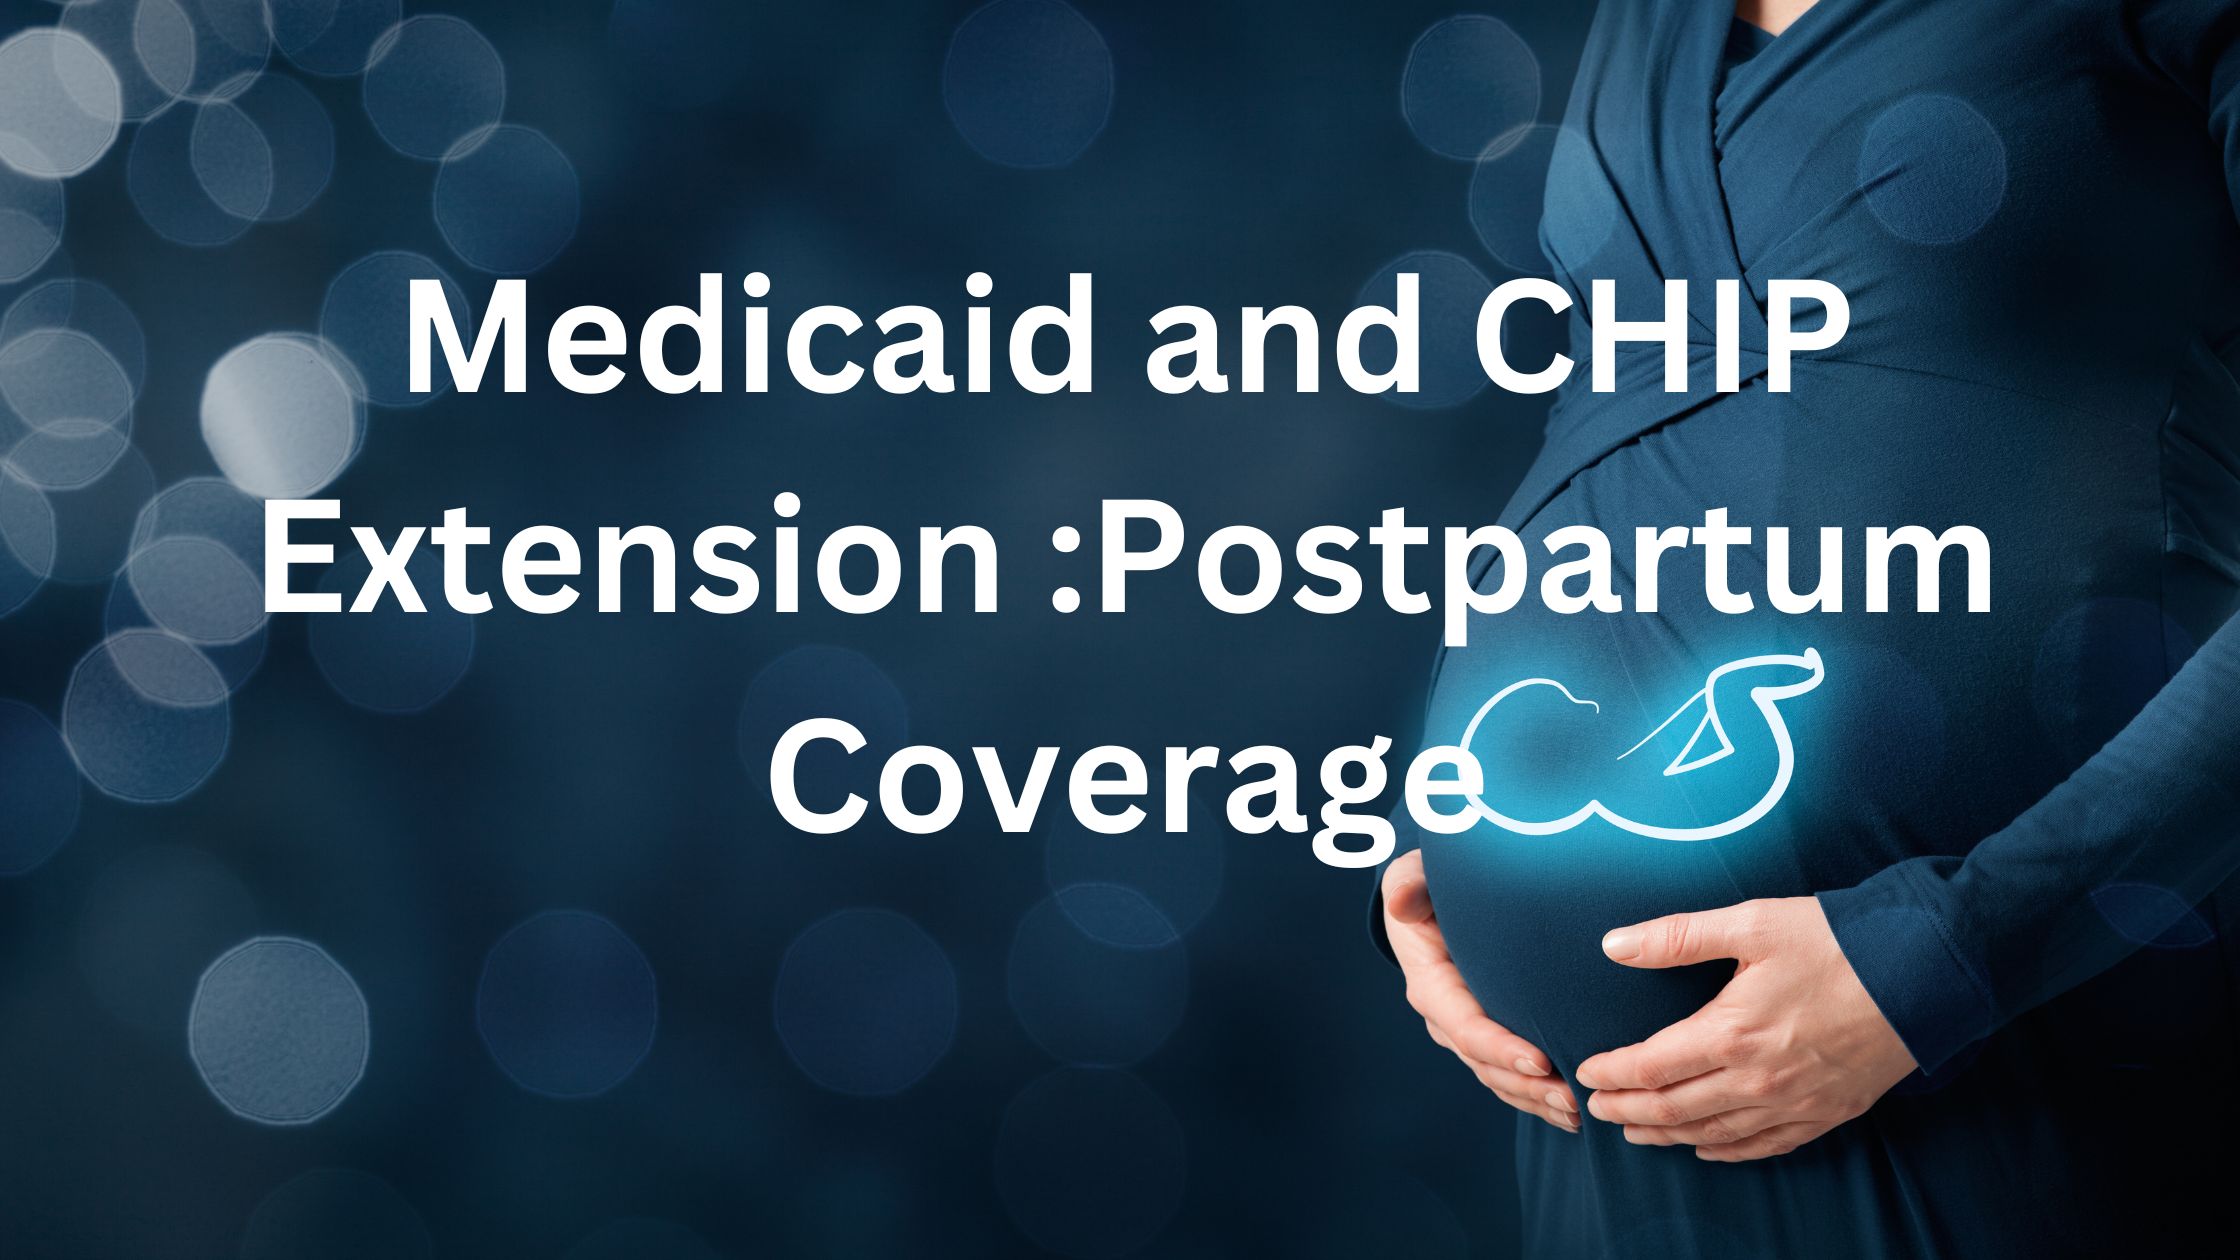 Affordable healthcare access Postpartum coverage in Medicaid and CHIP extension